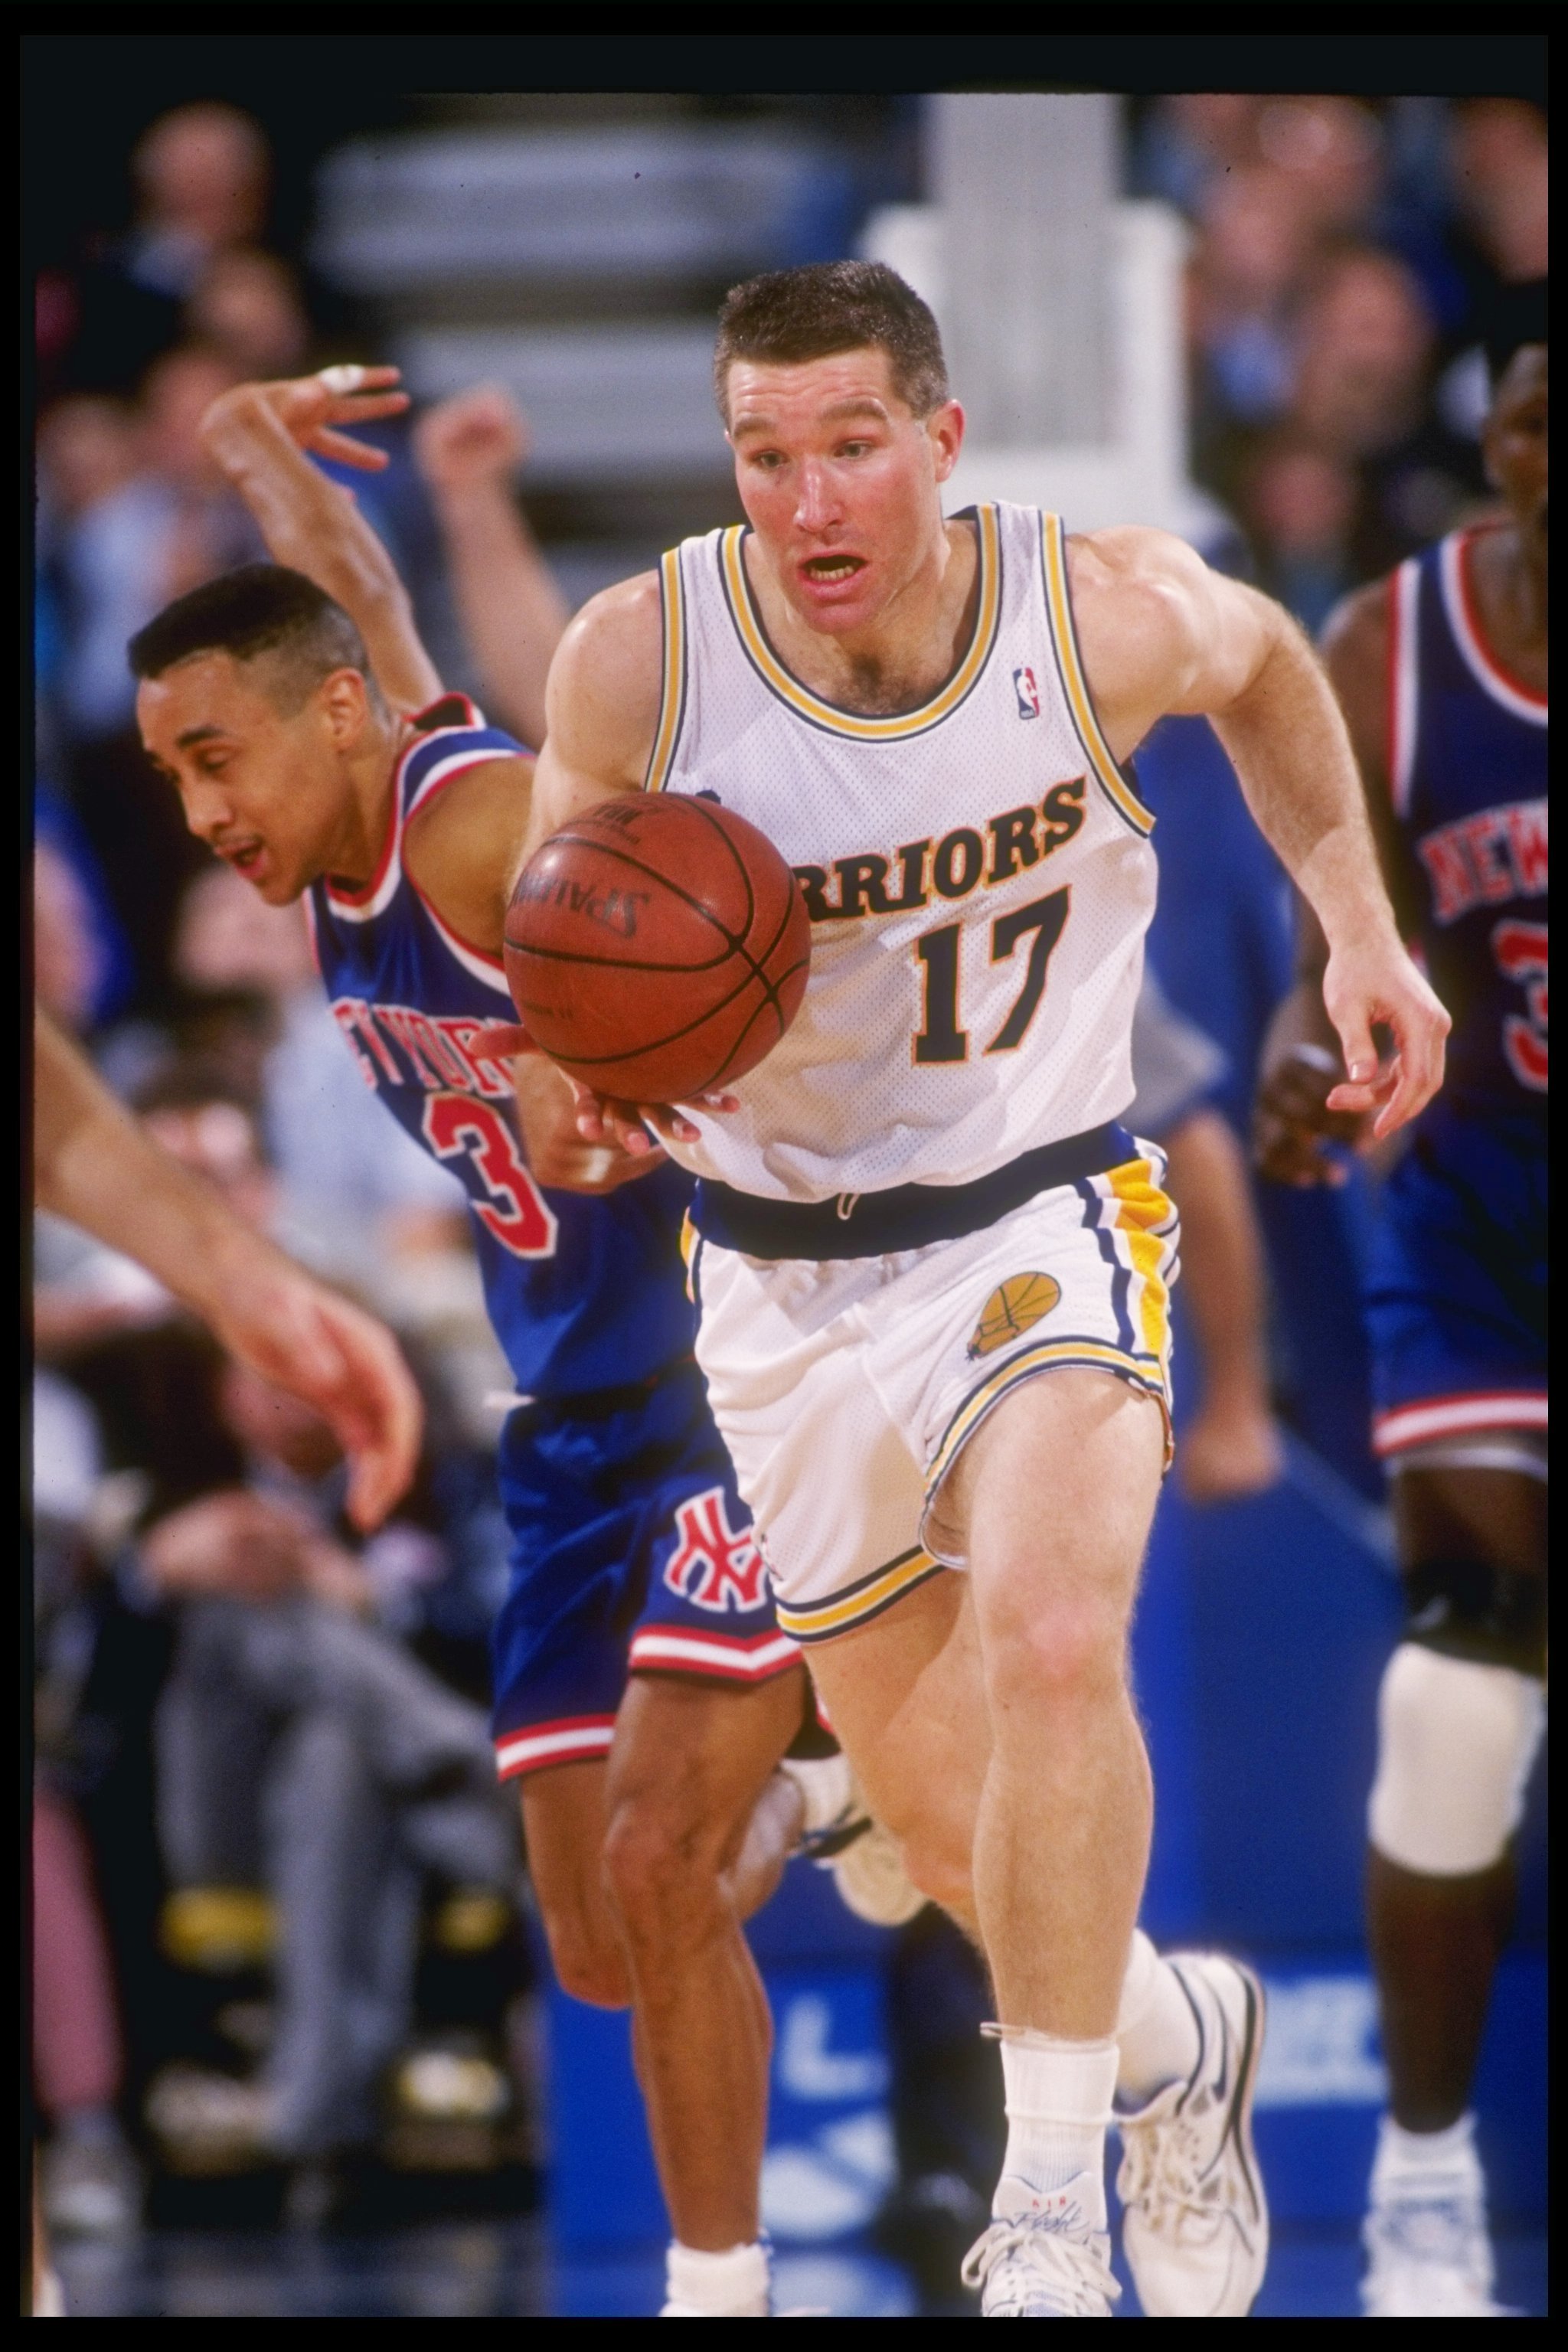 Lot Detail - 1992-93 Chris Mullin Golden State Warriors Game-Used